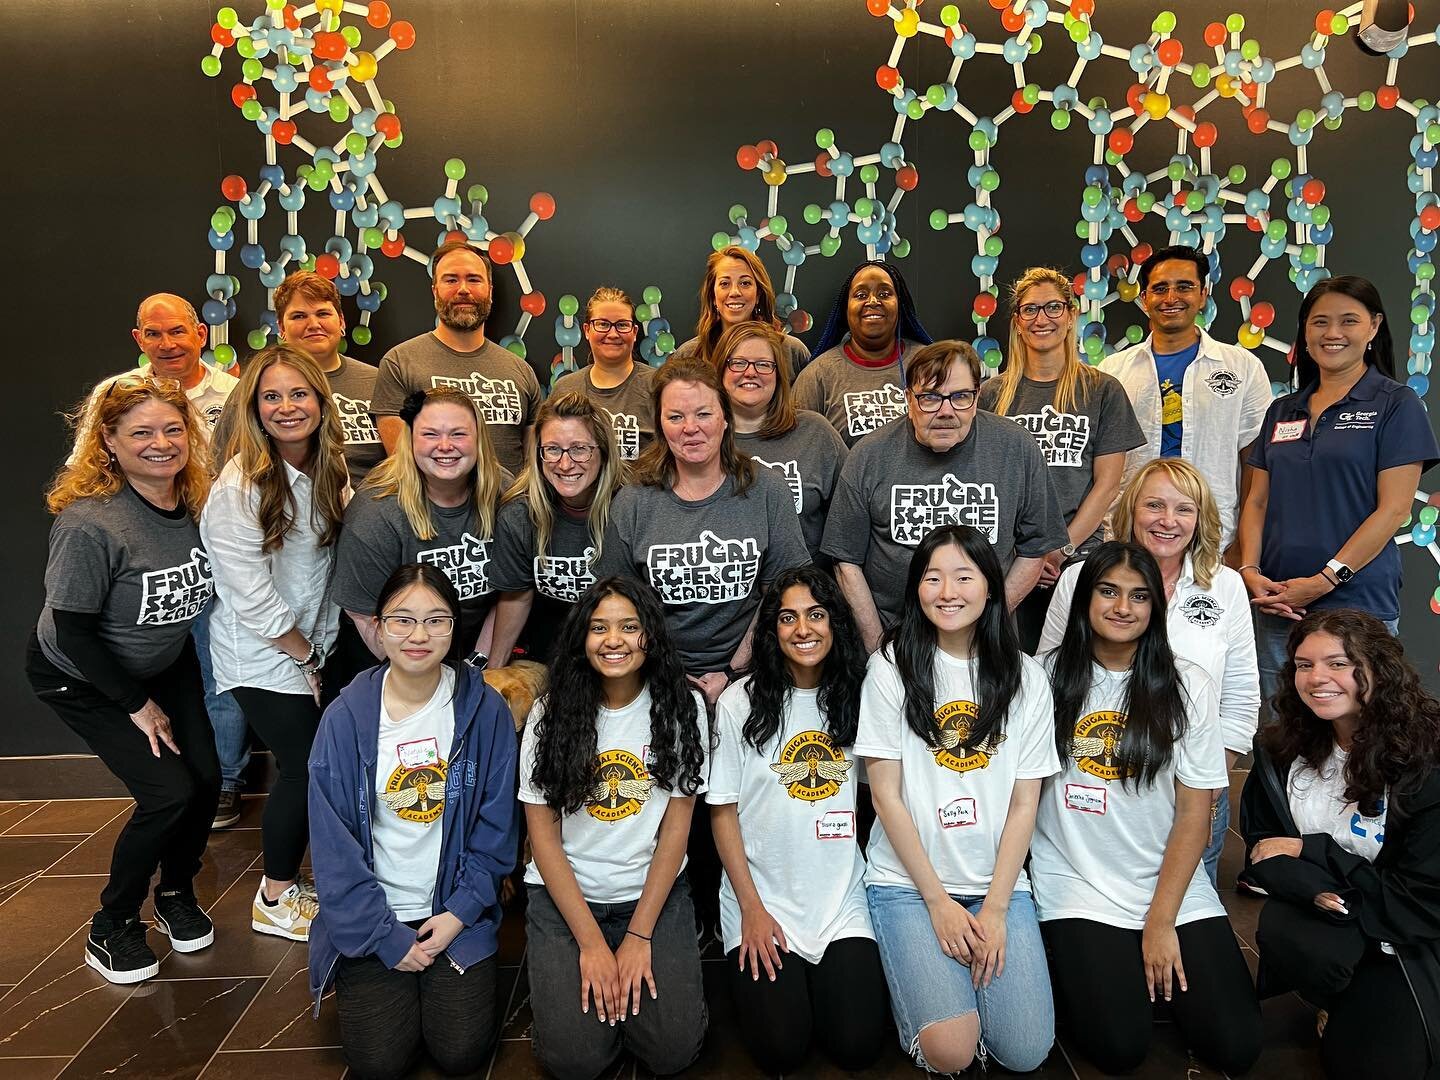 Here&rsquo;s our inaugural cohort of amazing Frugal Science Teachers and volunteers. We had a fun week inventing and experimenting with synthetic biology. I can&rsquo;t wait to visit your classrooms.